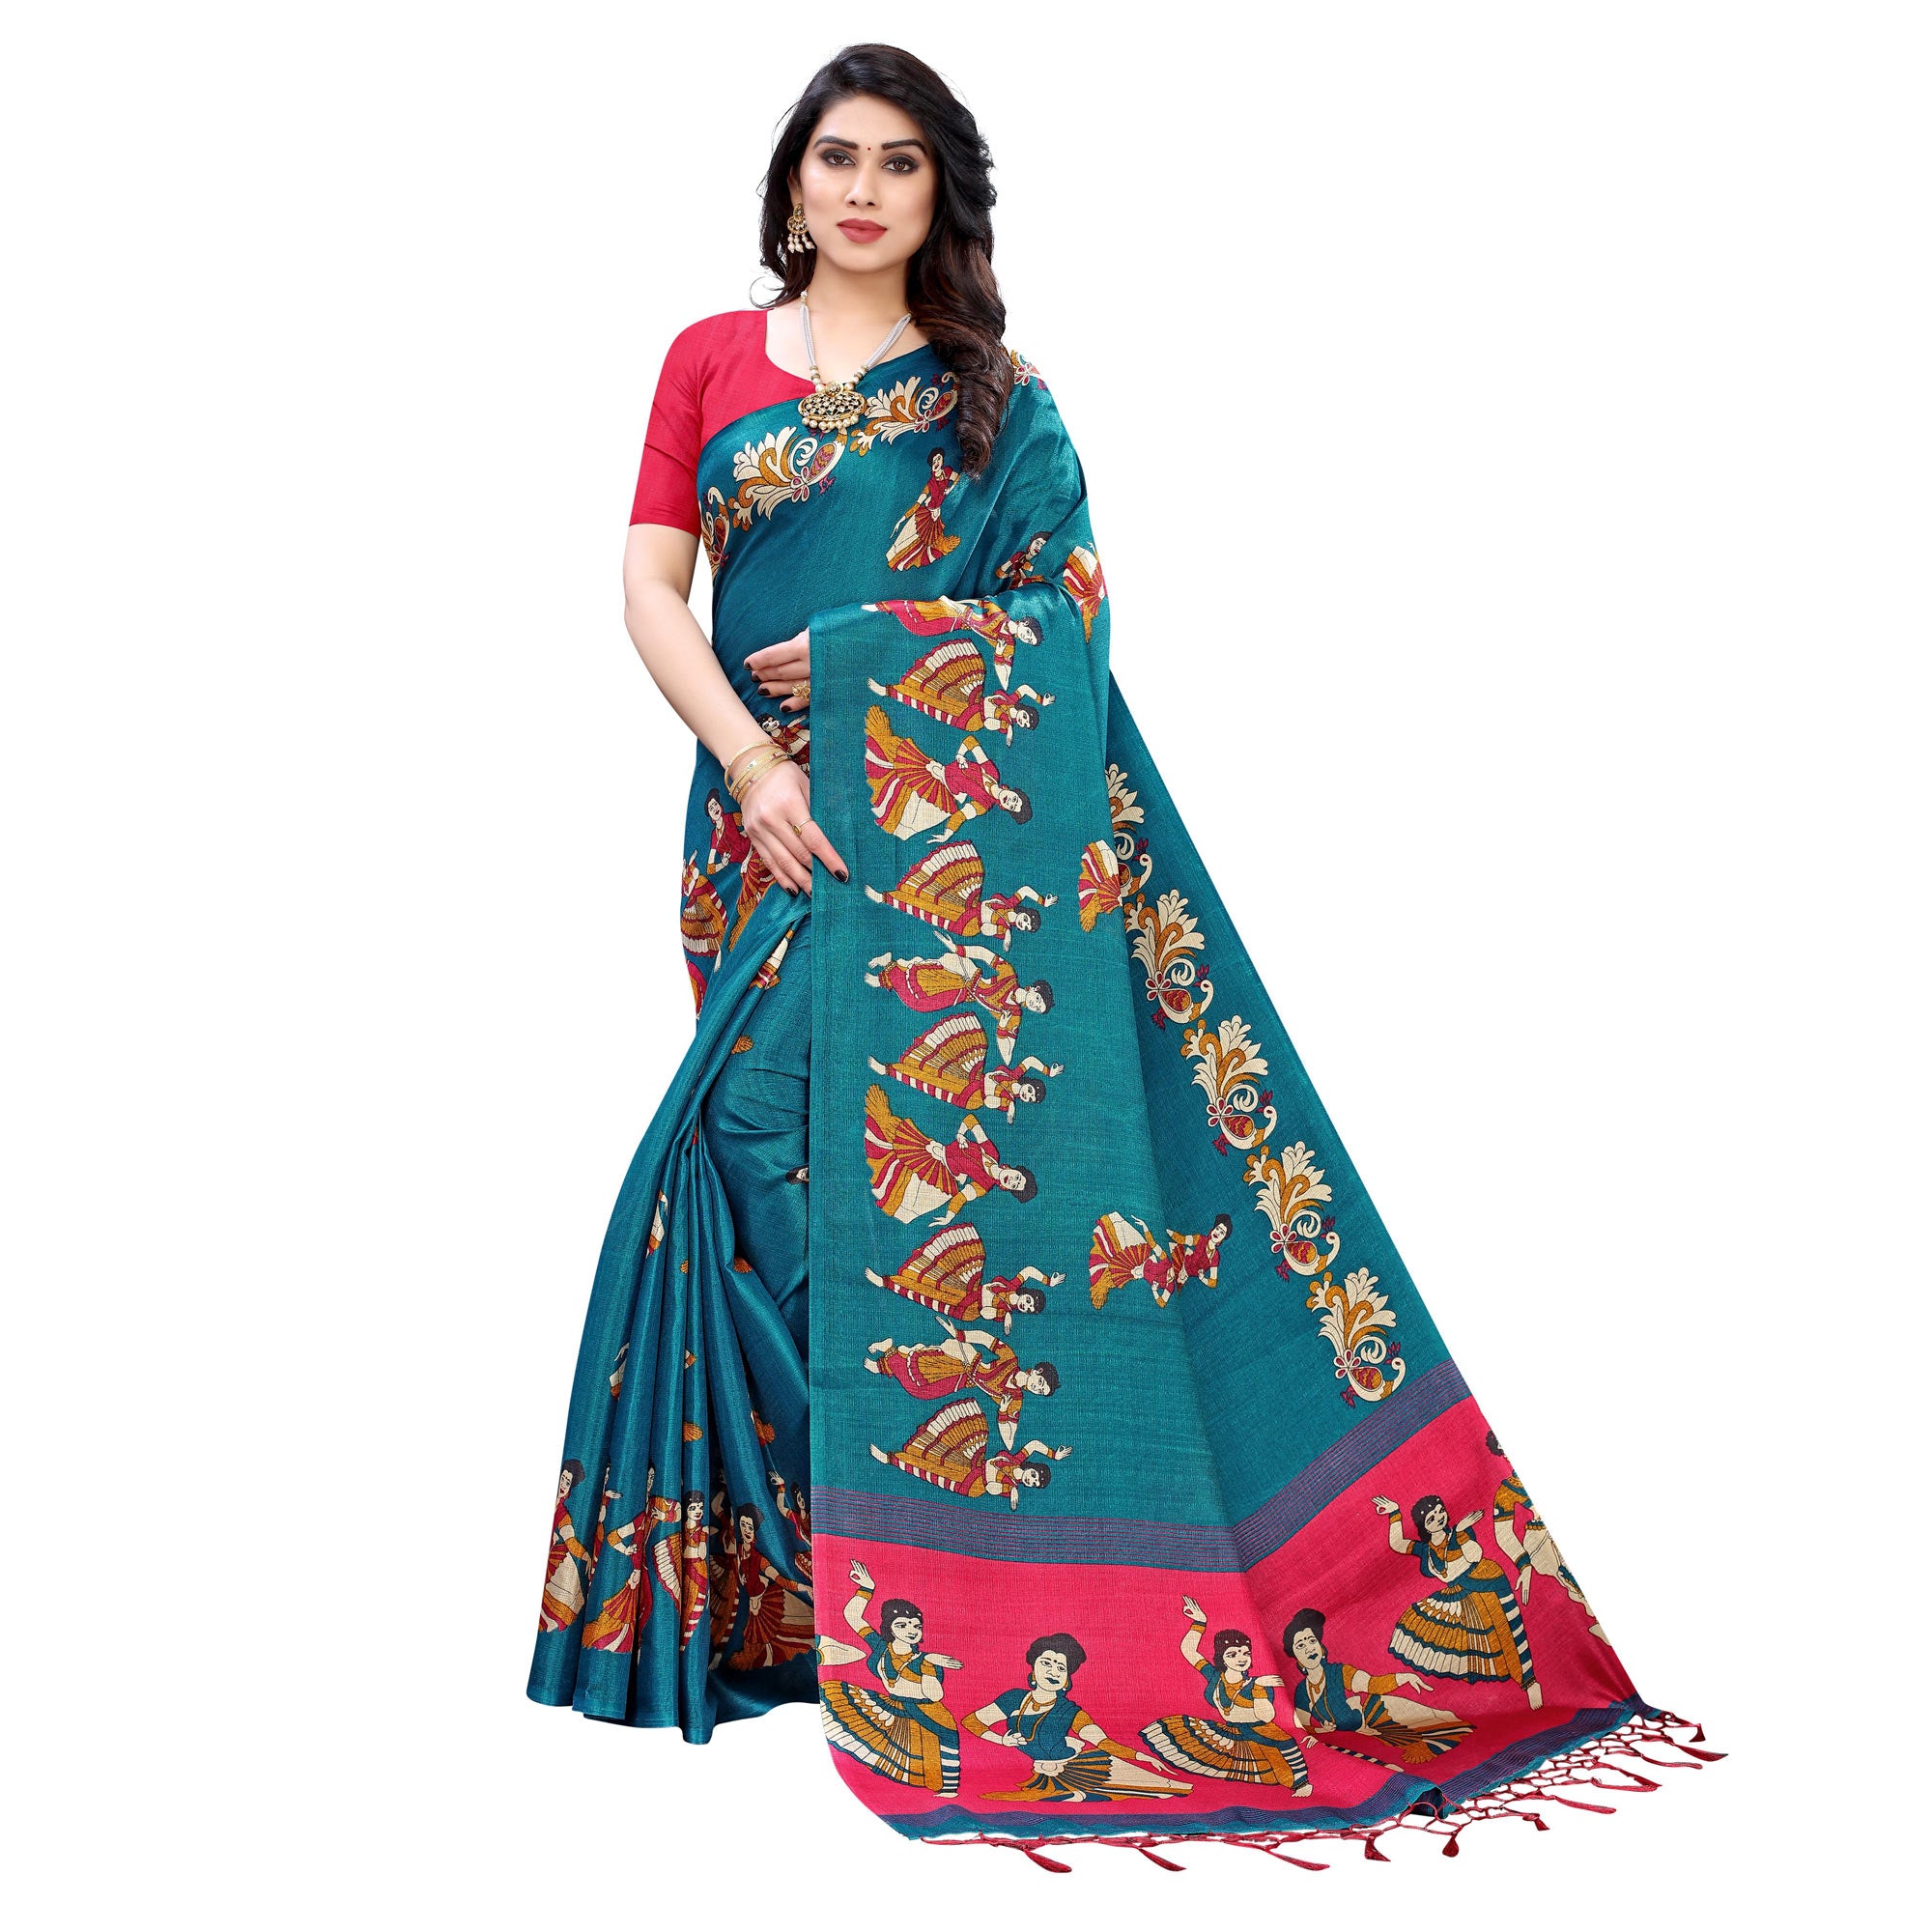 Flirty Turquoise Colored Casual Wear Printed Cotton Silk Saree With Tassels